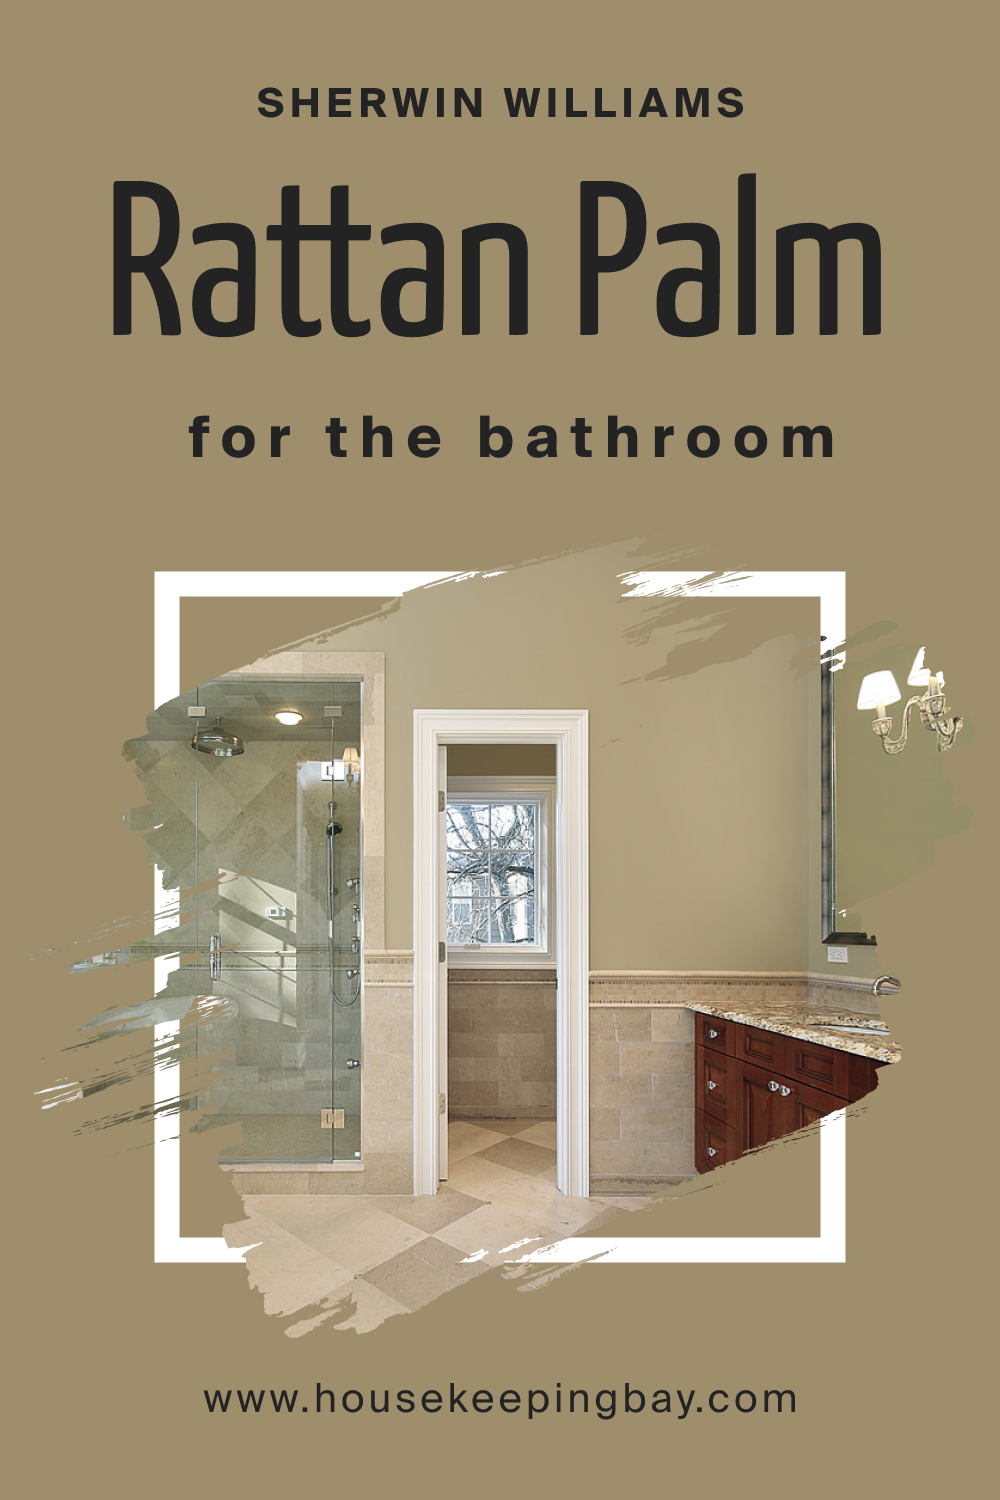 Sherwin Williams. SW 9533 Rattan Palm For the Bathroom